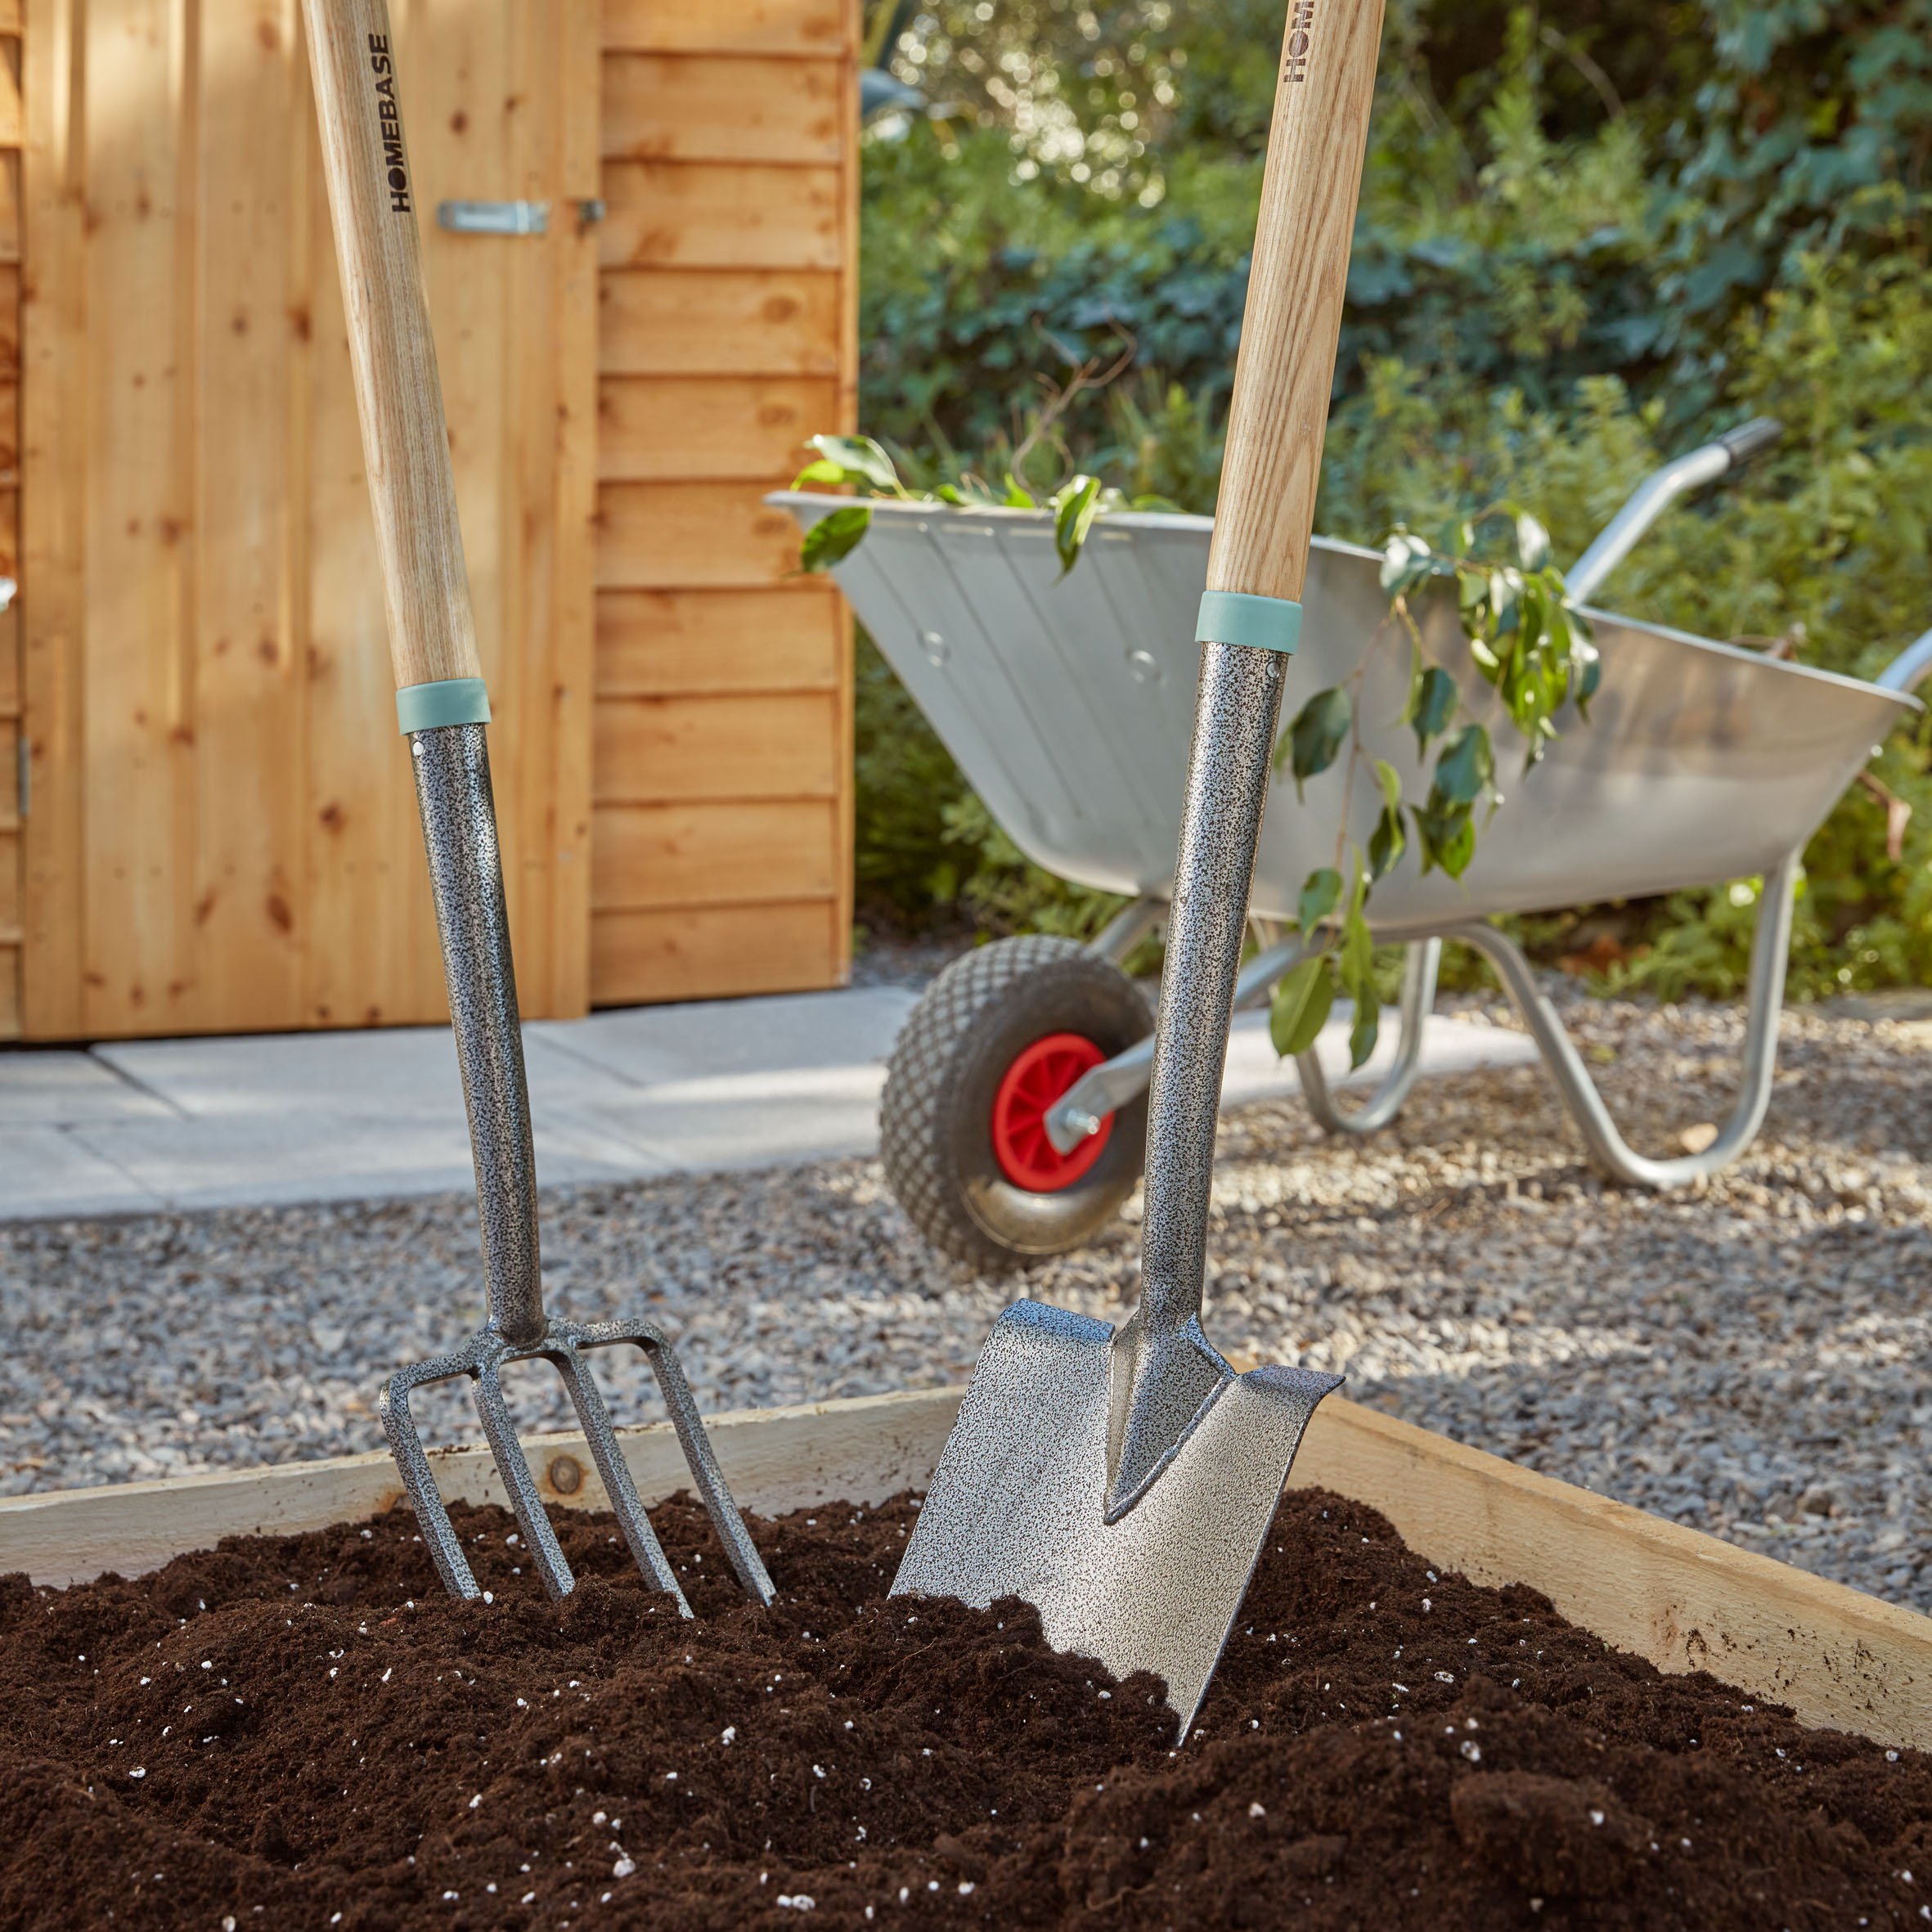 create your own low maintenance garden with these design ideas from homebase